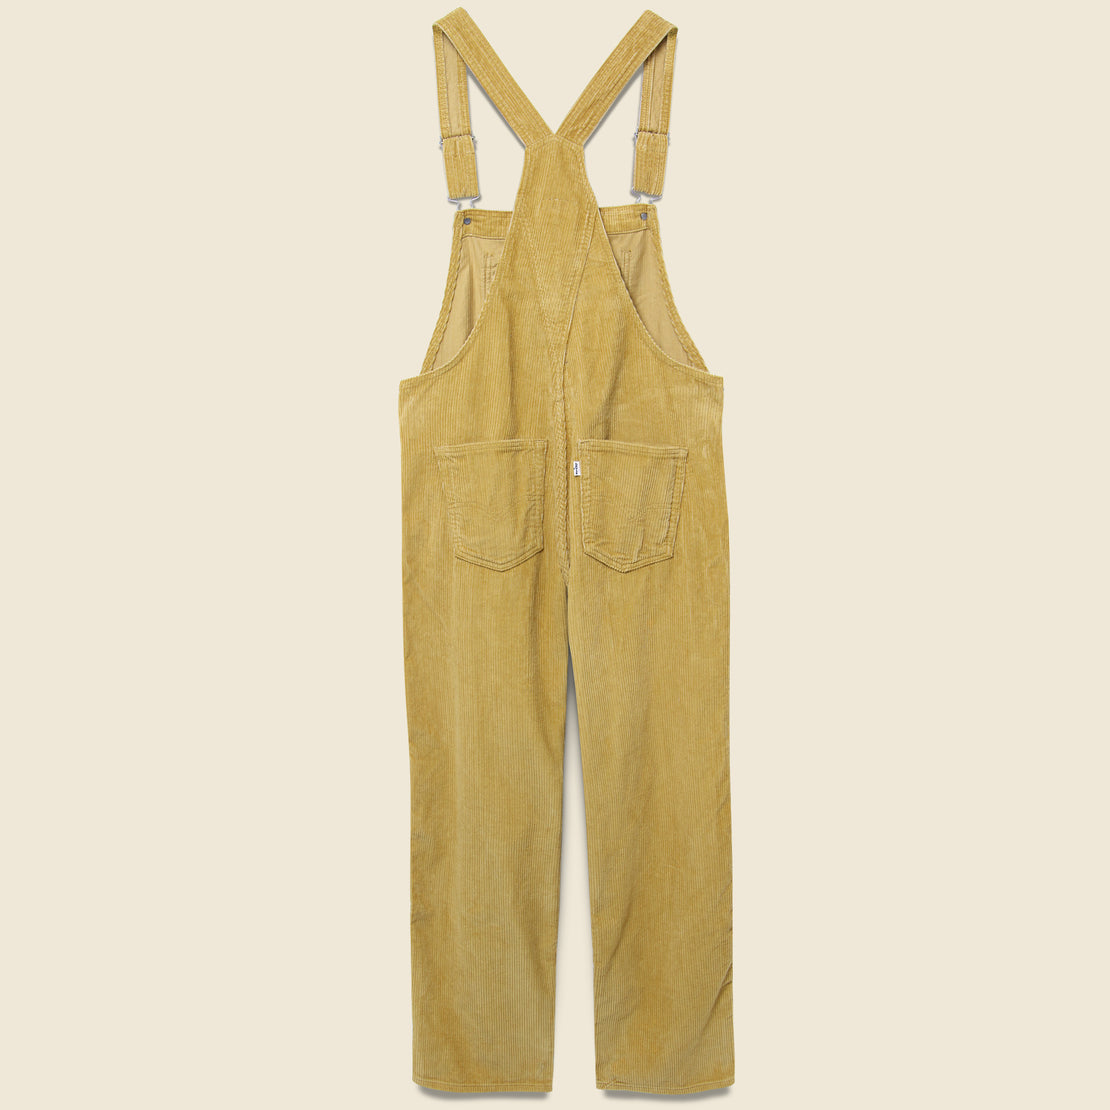 Vintage Overall - Iced Coffee Corduroy - Levis Premium - STAG Provisions - W - Onepiece - Overalls